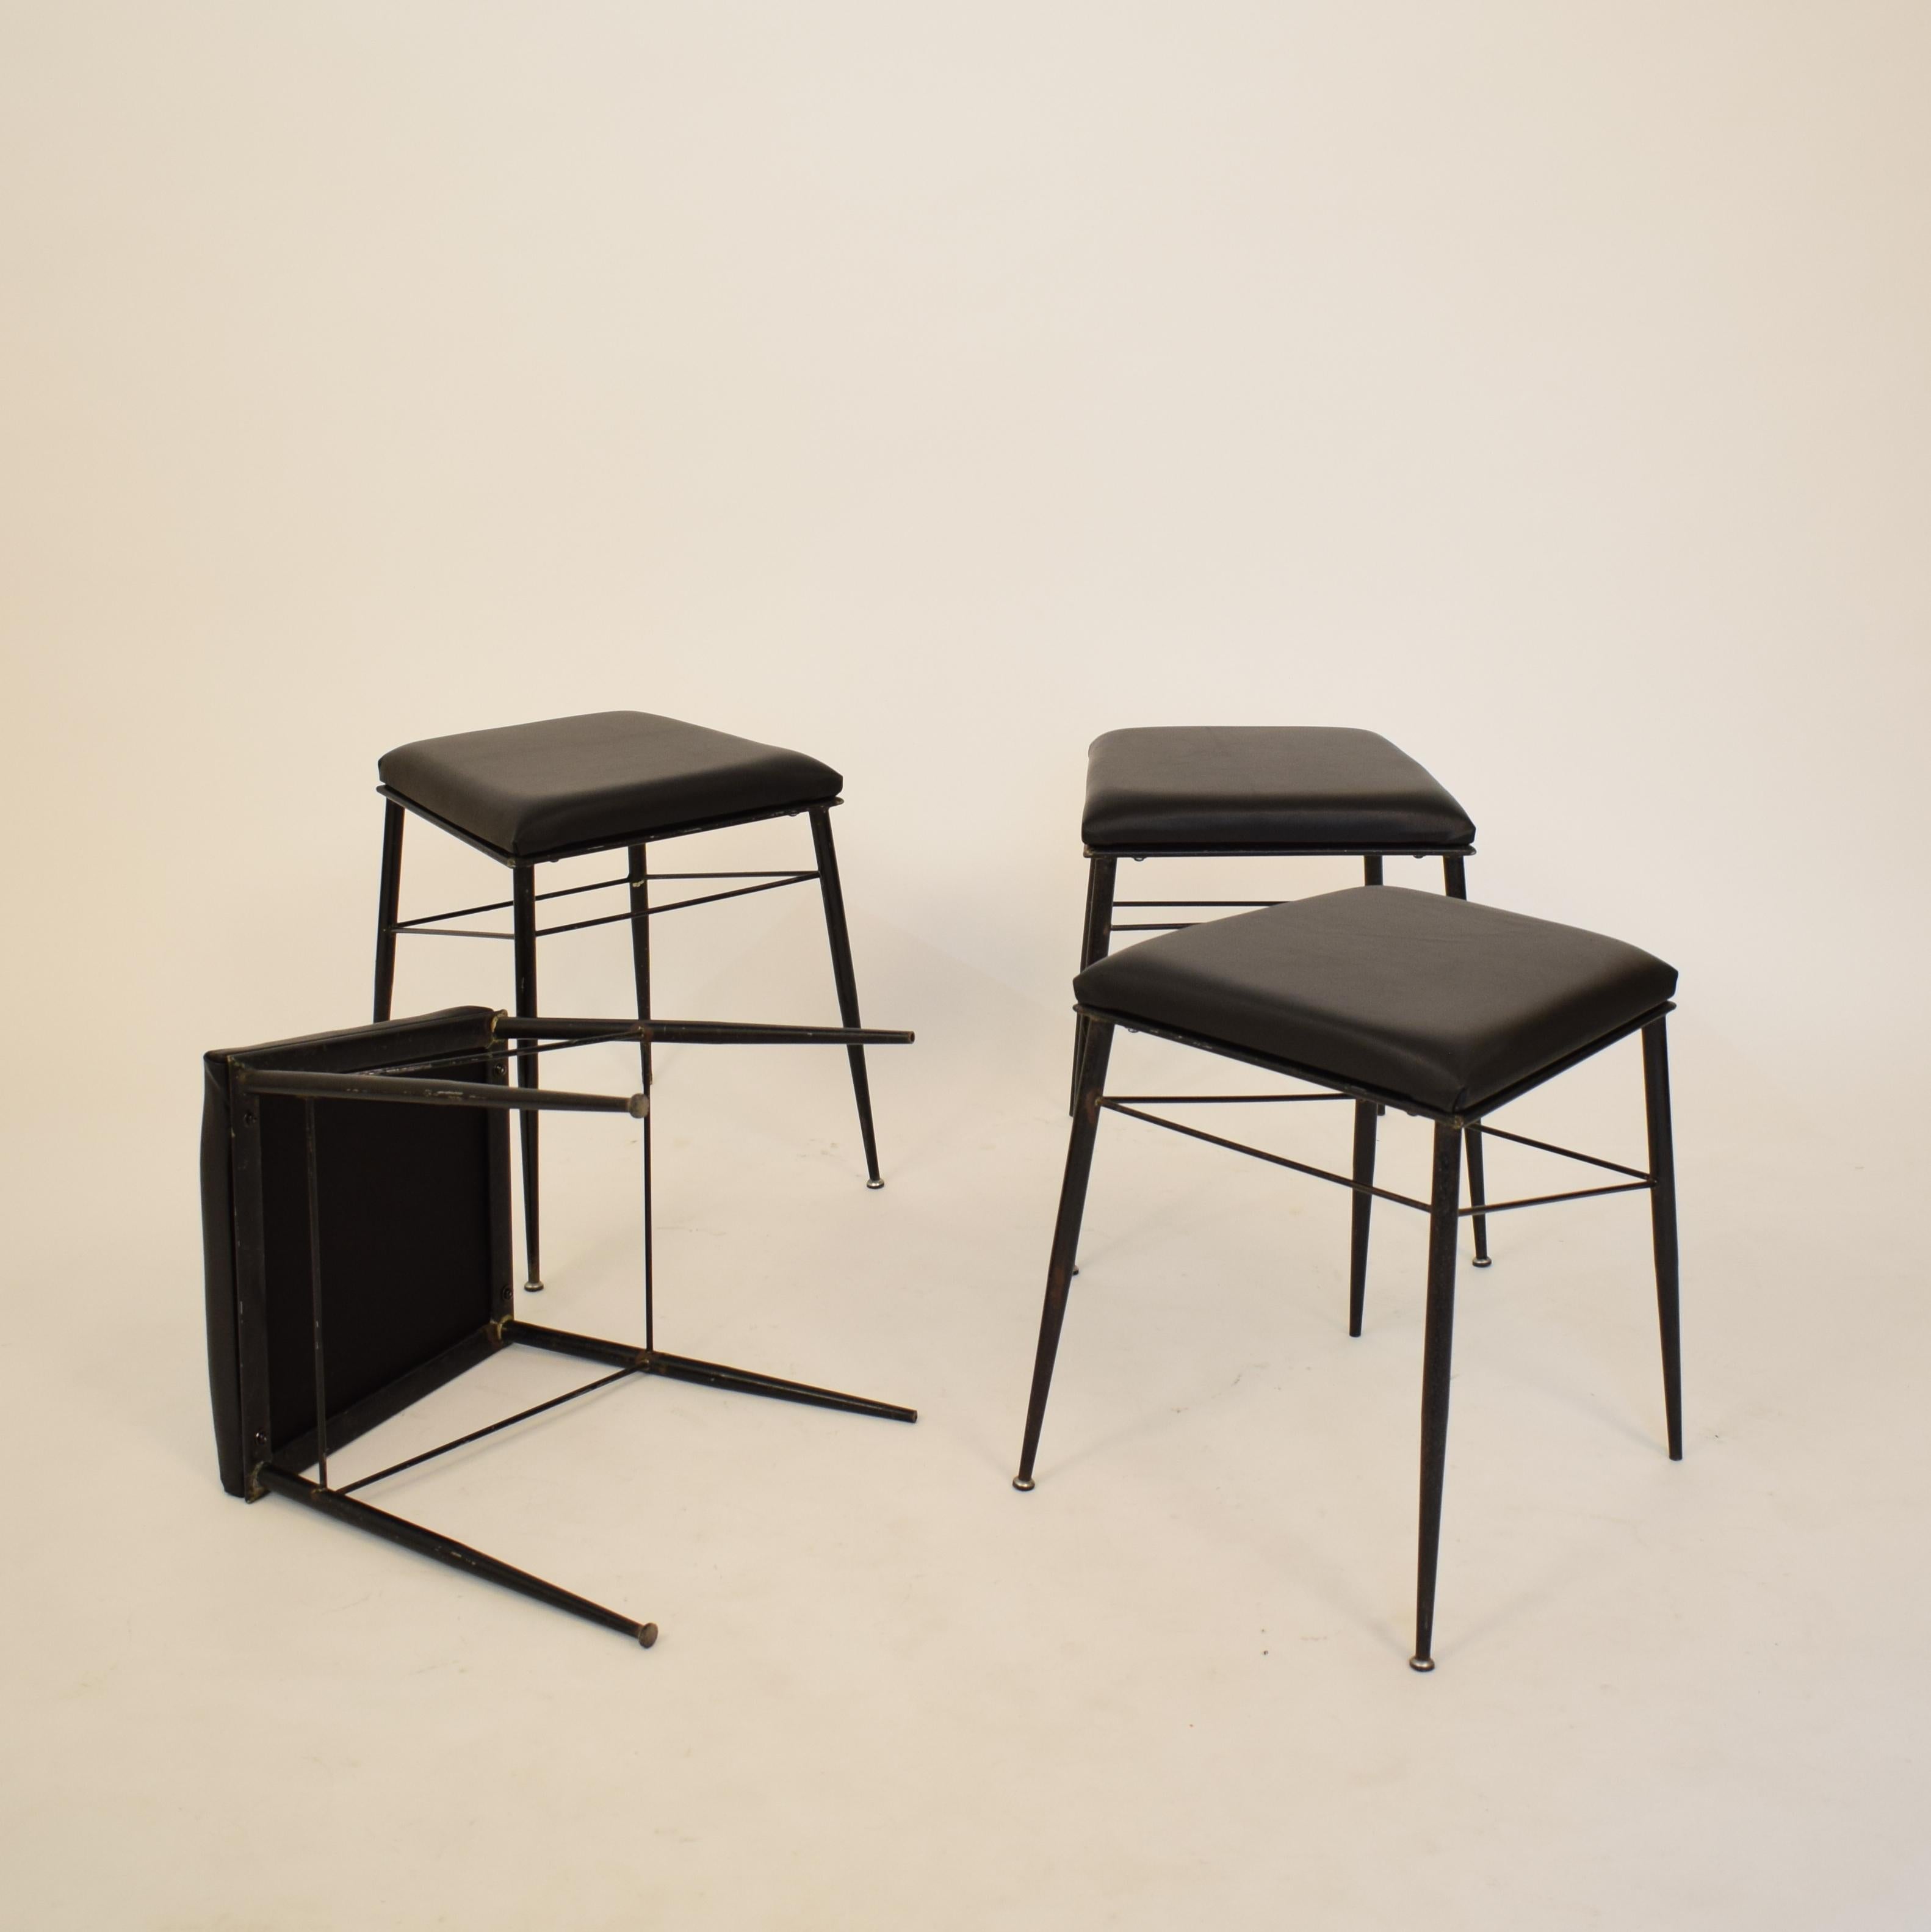 Lacquered Set of Four Black Italian Midcentury Metal and Leather Stools, circa 1950